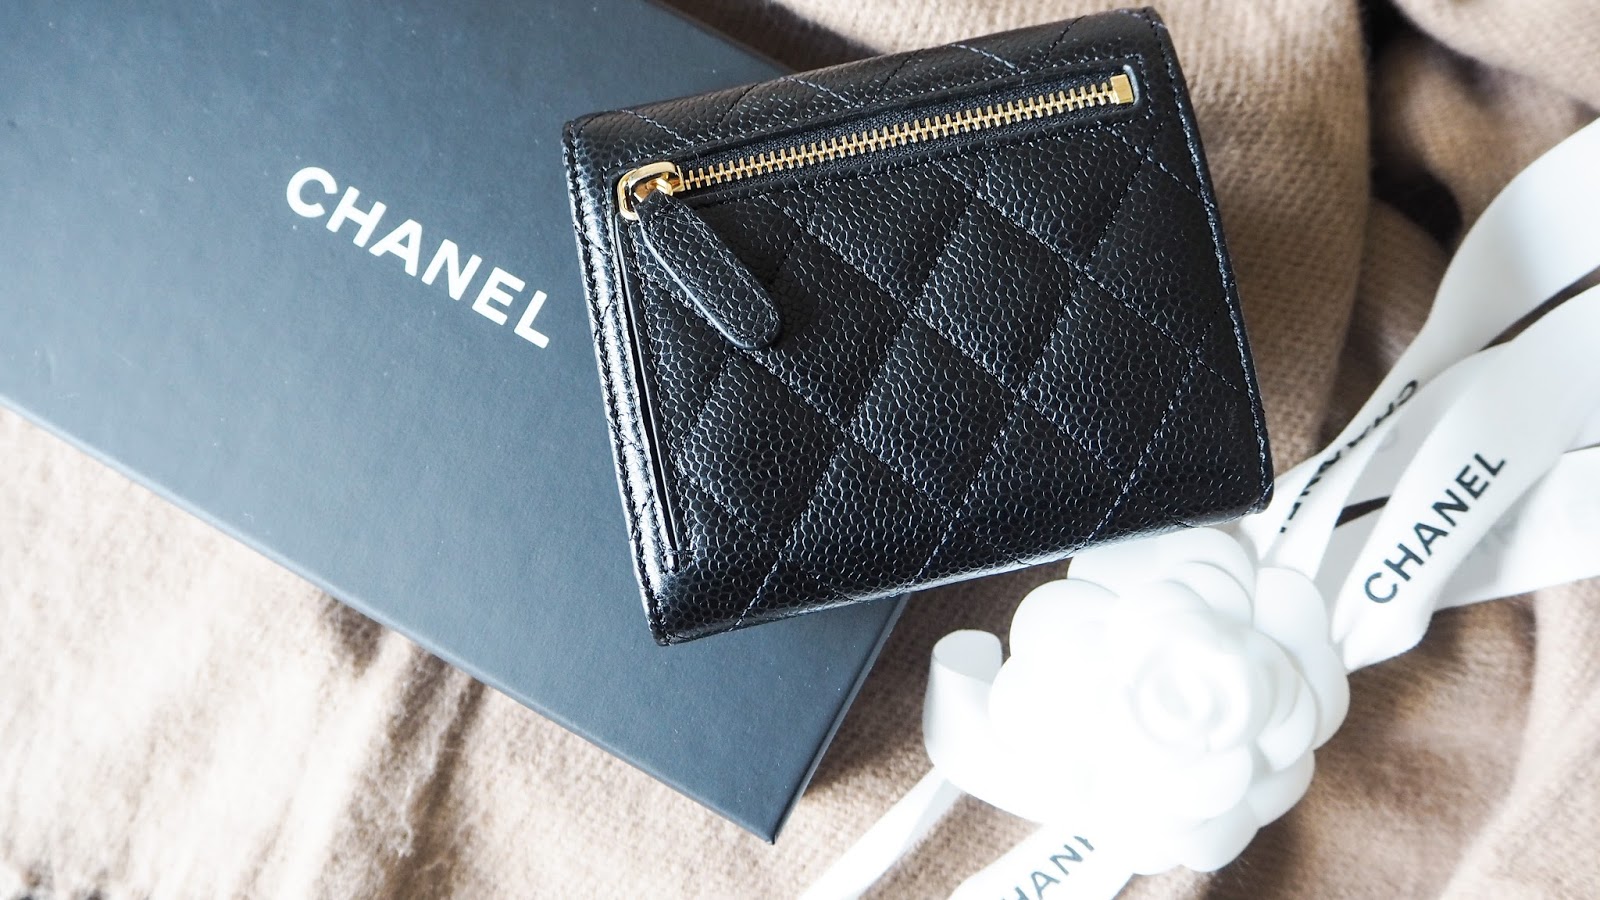 Chanel classic small lamskin wallet, photos and review